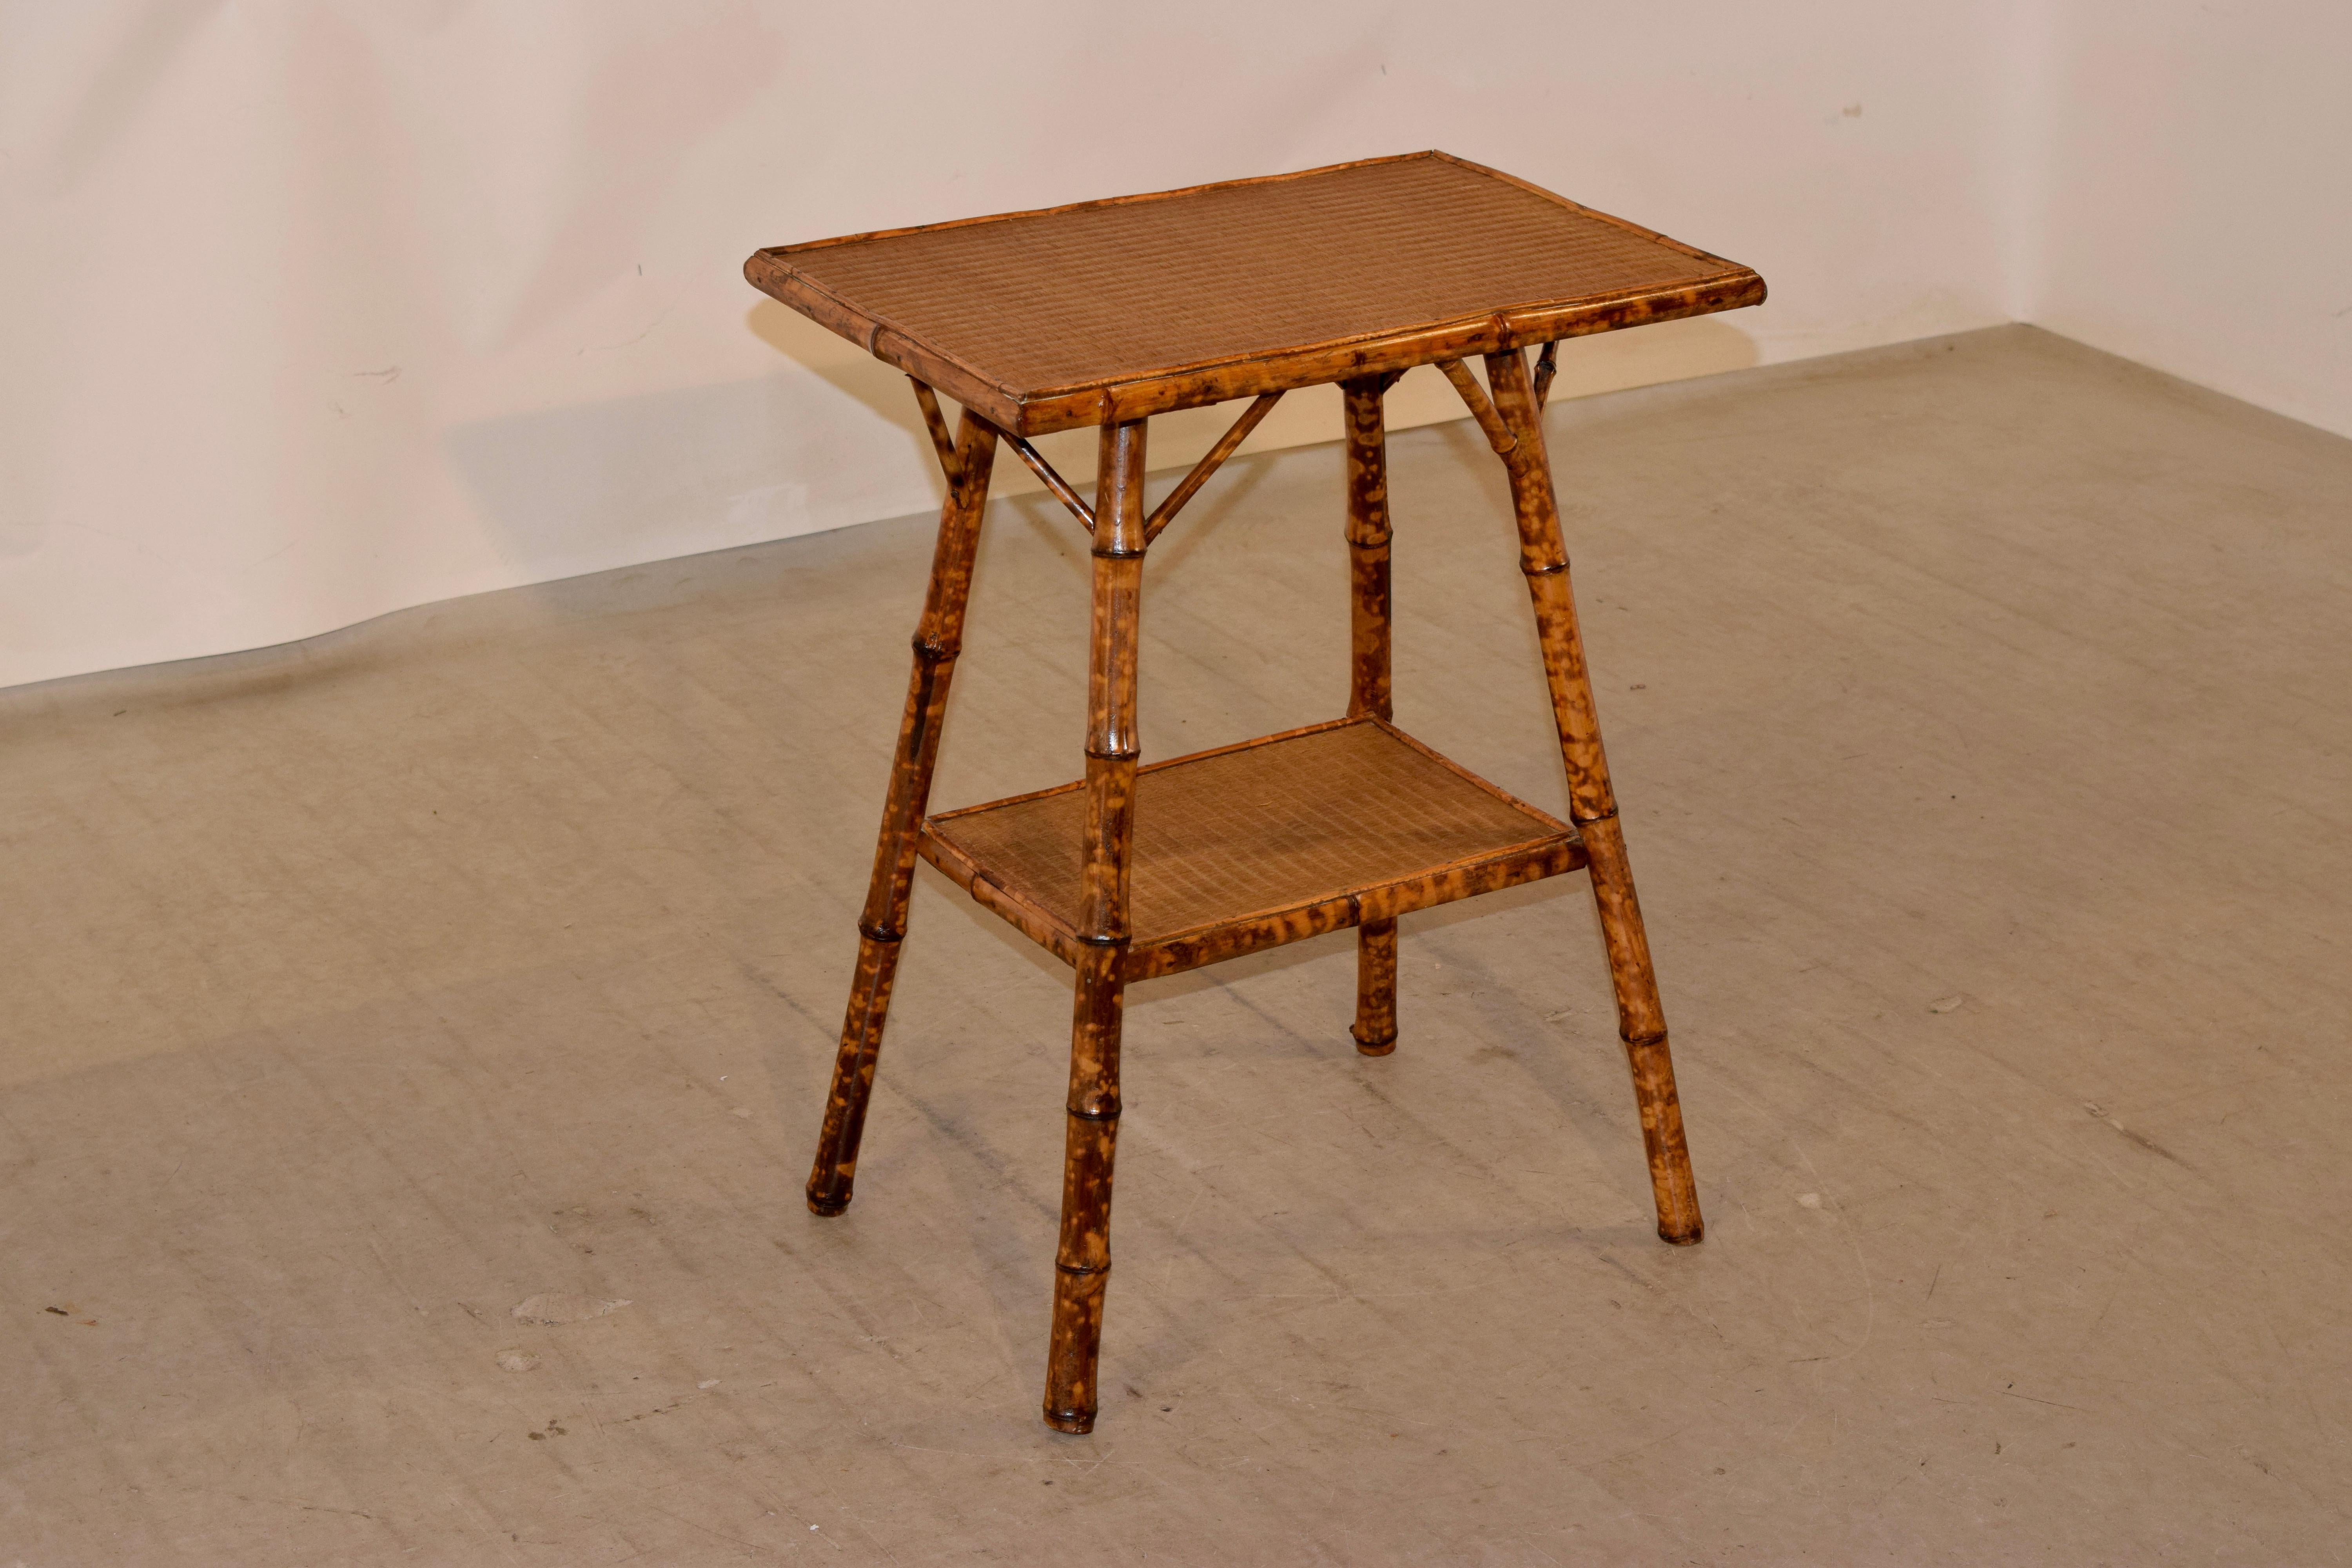 Late 19th century tortoise bamboo side table from France with a rush covered top and lower shelf.